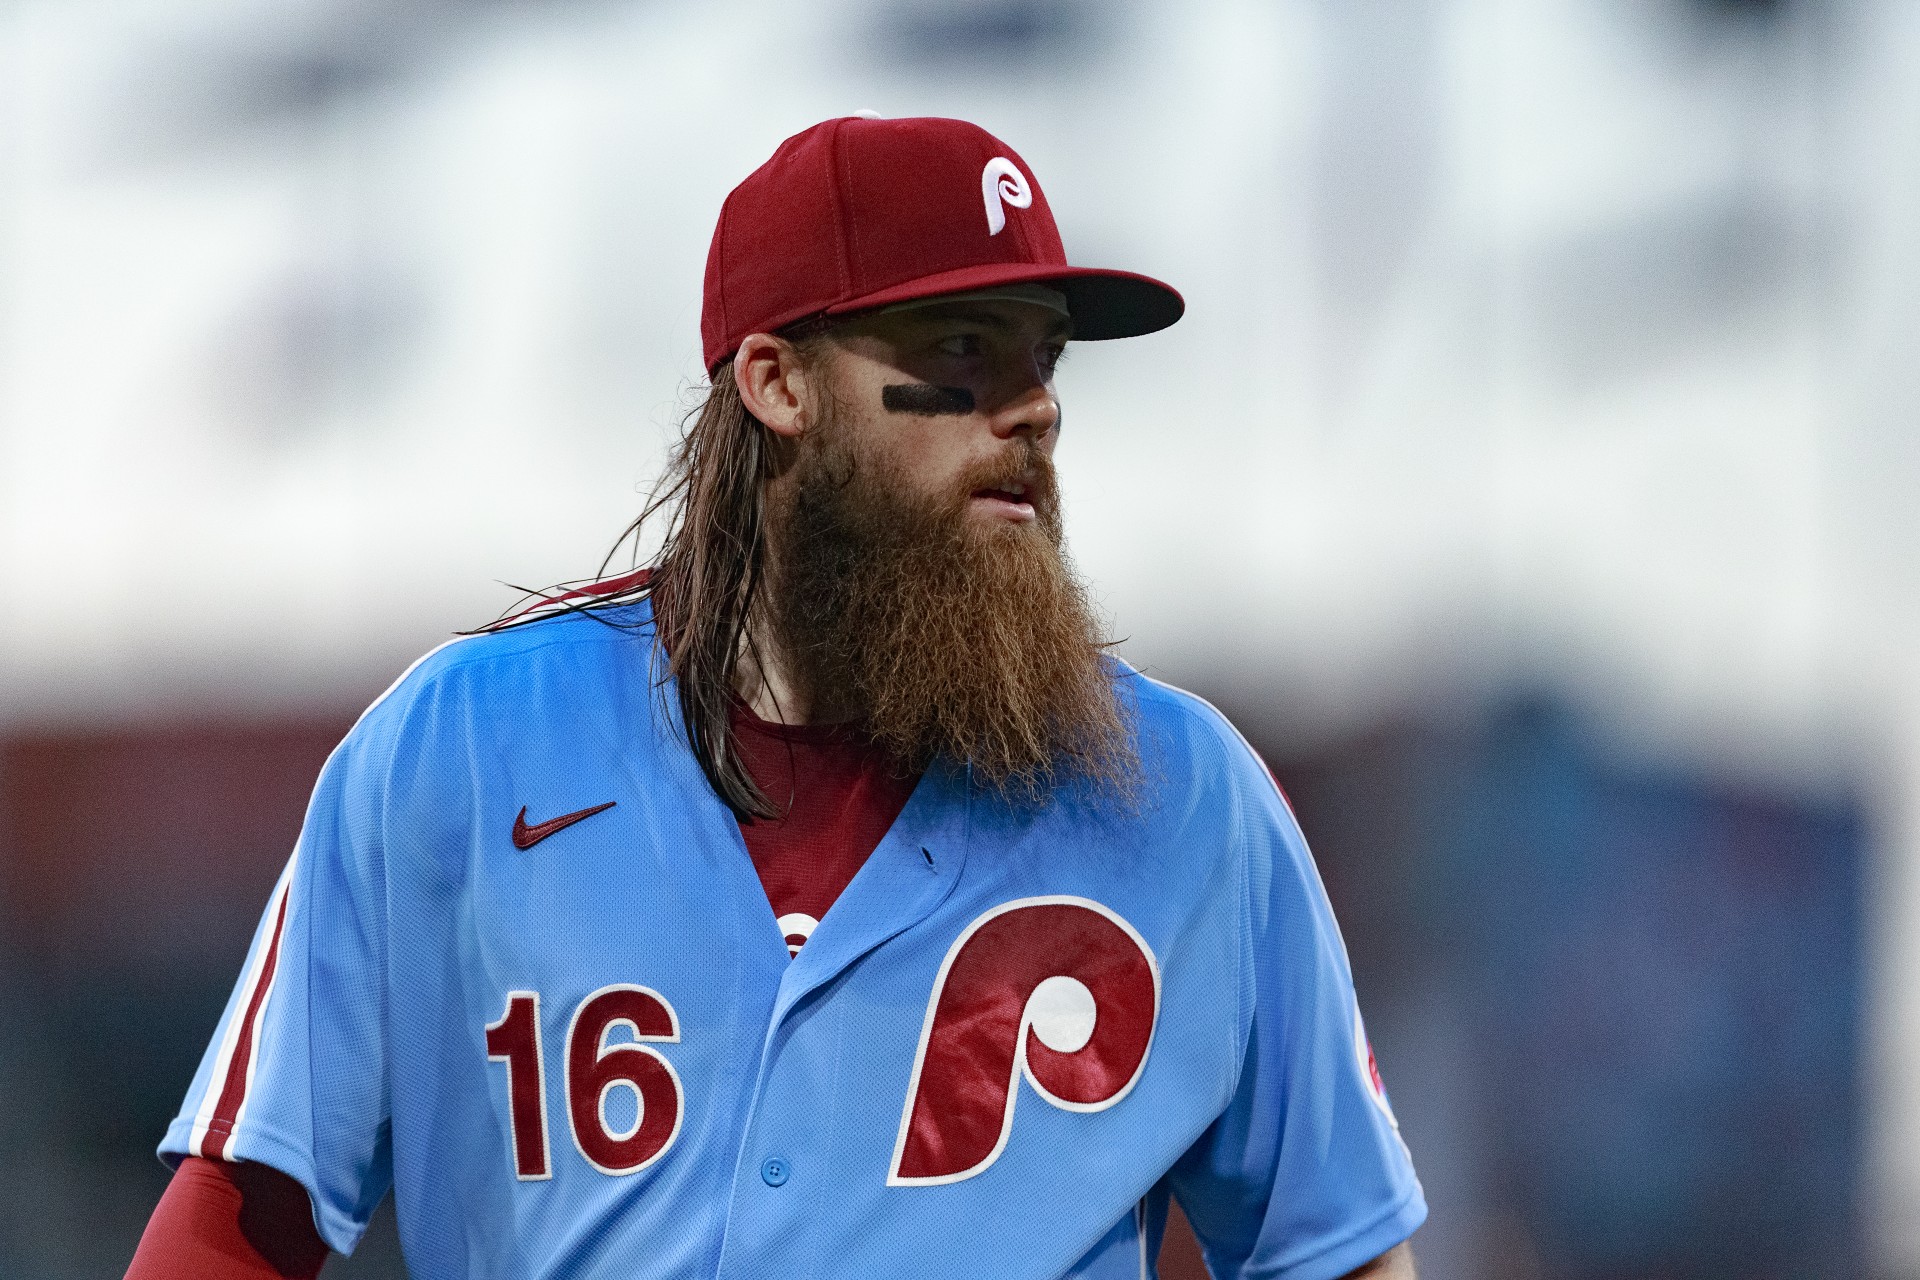 just a reminder that Marsh has a face under there : r/phillies